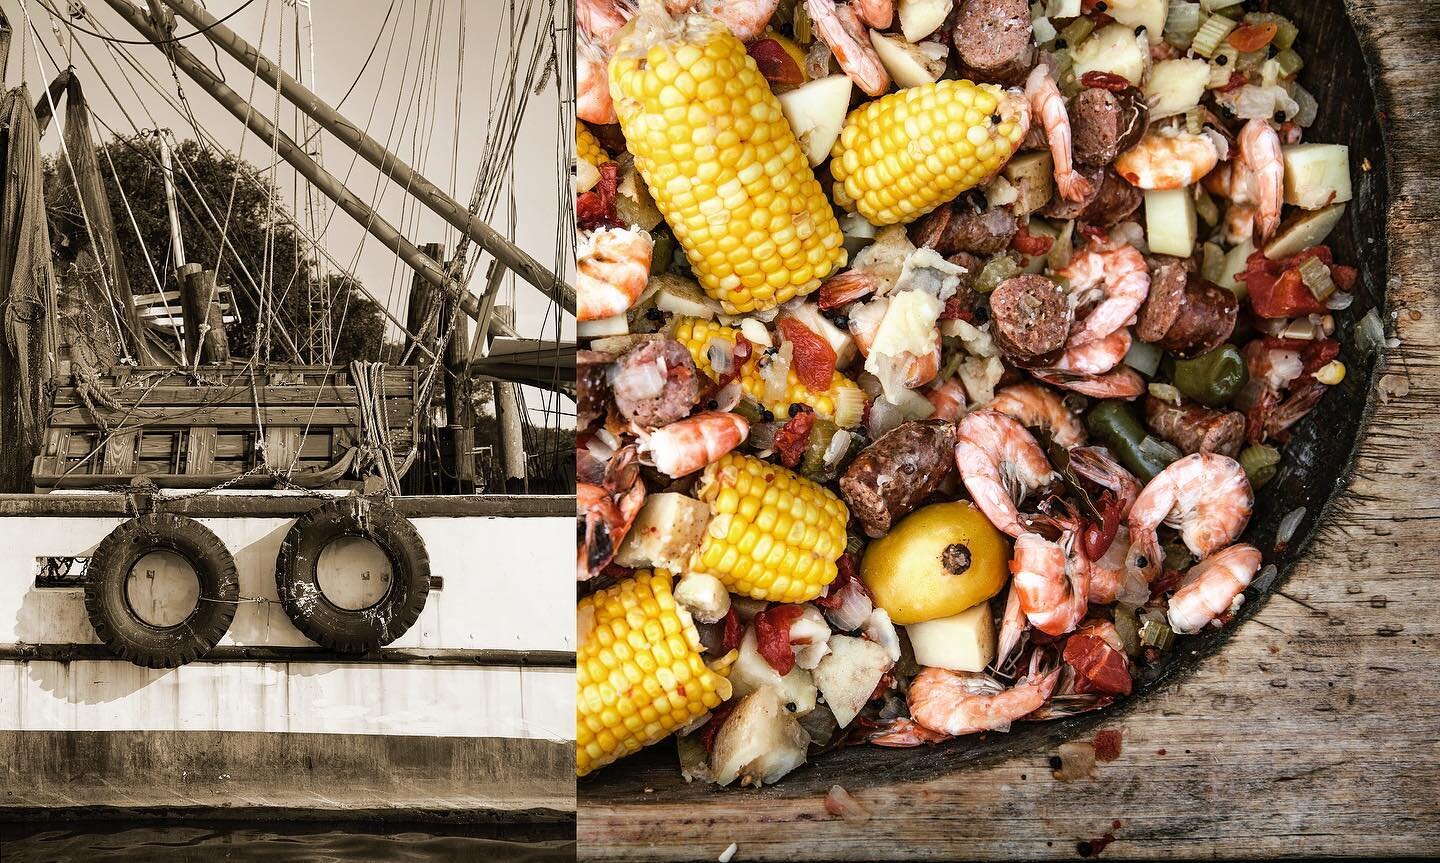 Lowcountry imagery. A very special place / culture. And 1 of the places I call home. #jwkphoto #commercialphotographer #foodphotographer #lowcountry #southcarolinaliving #discoverSC #lowcountryboil